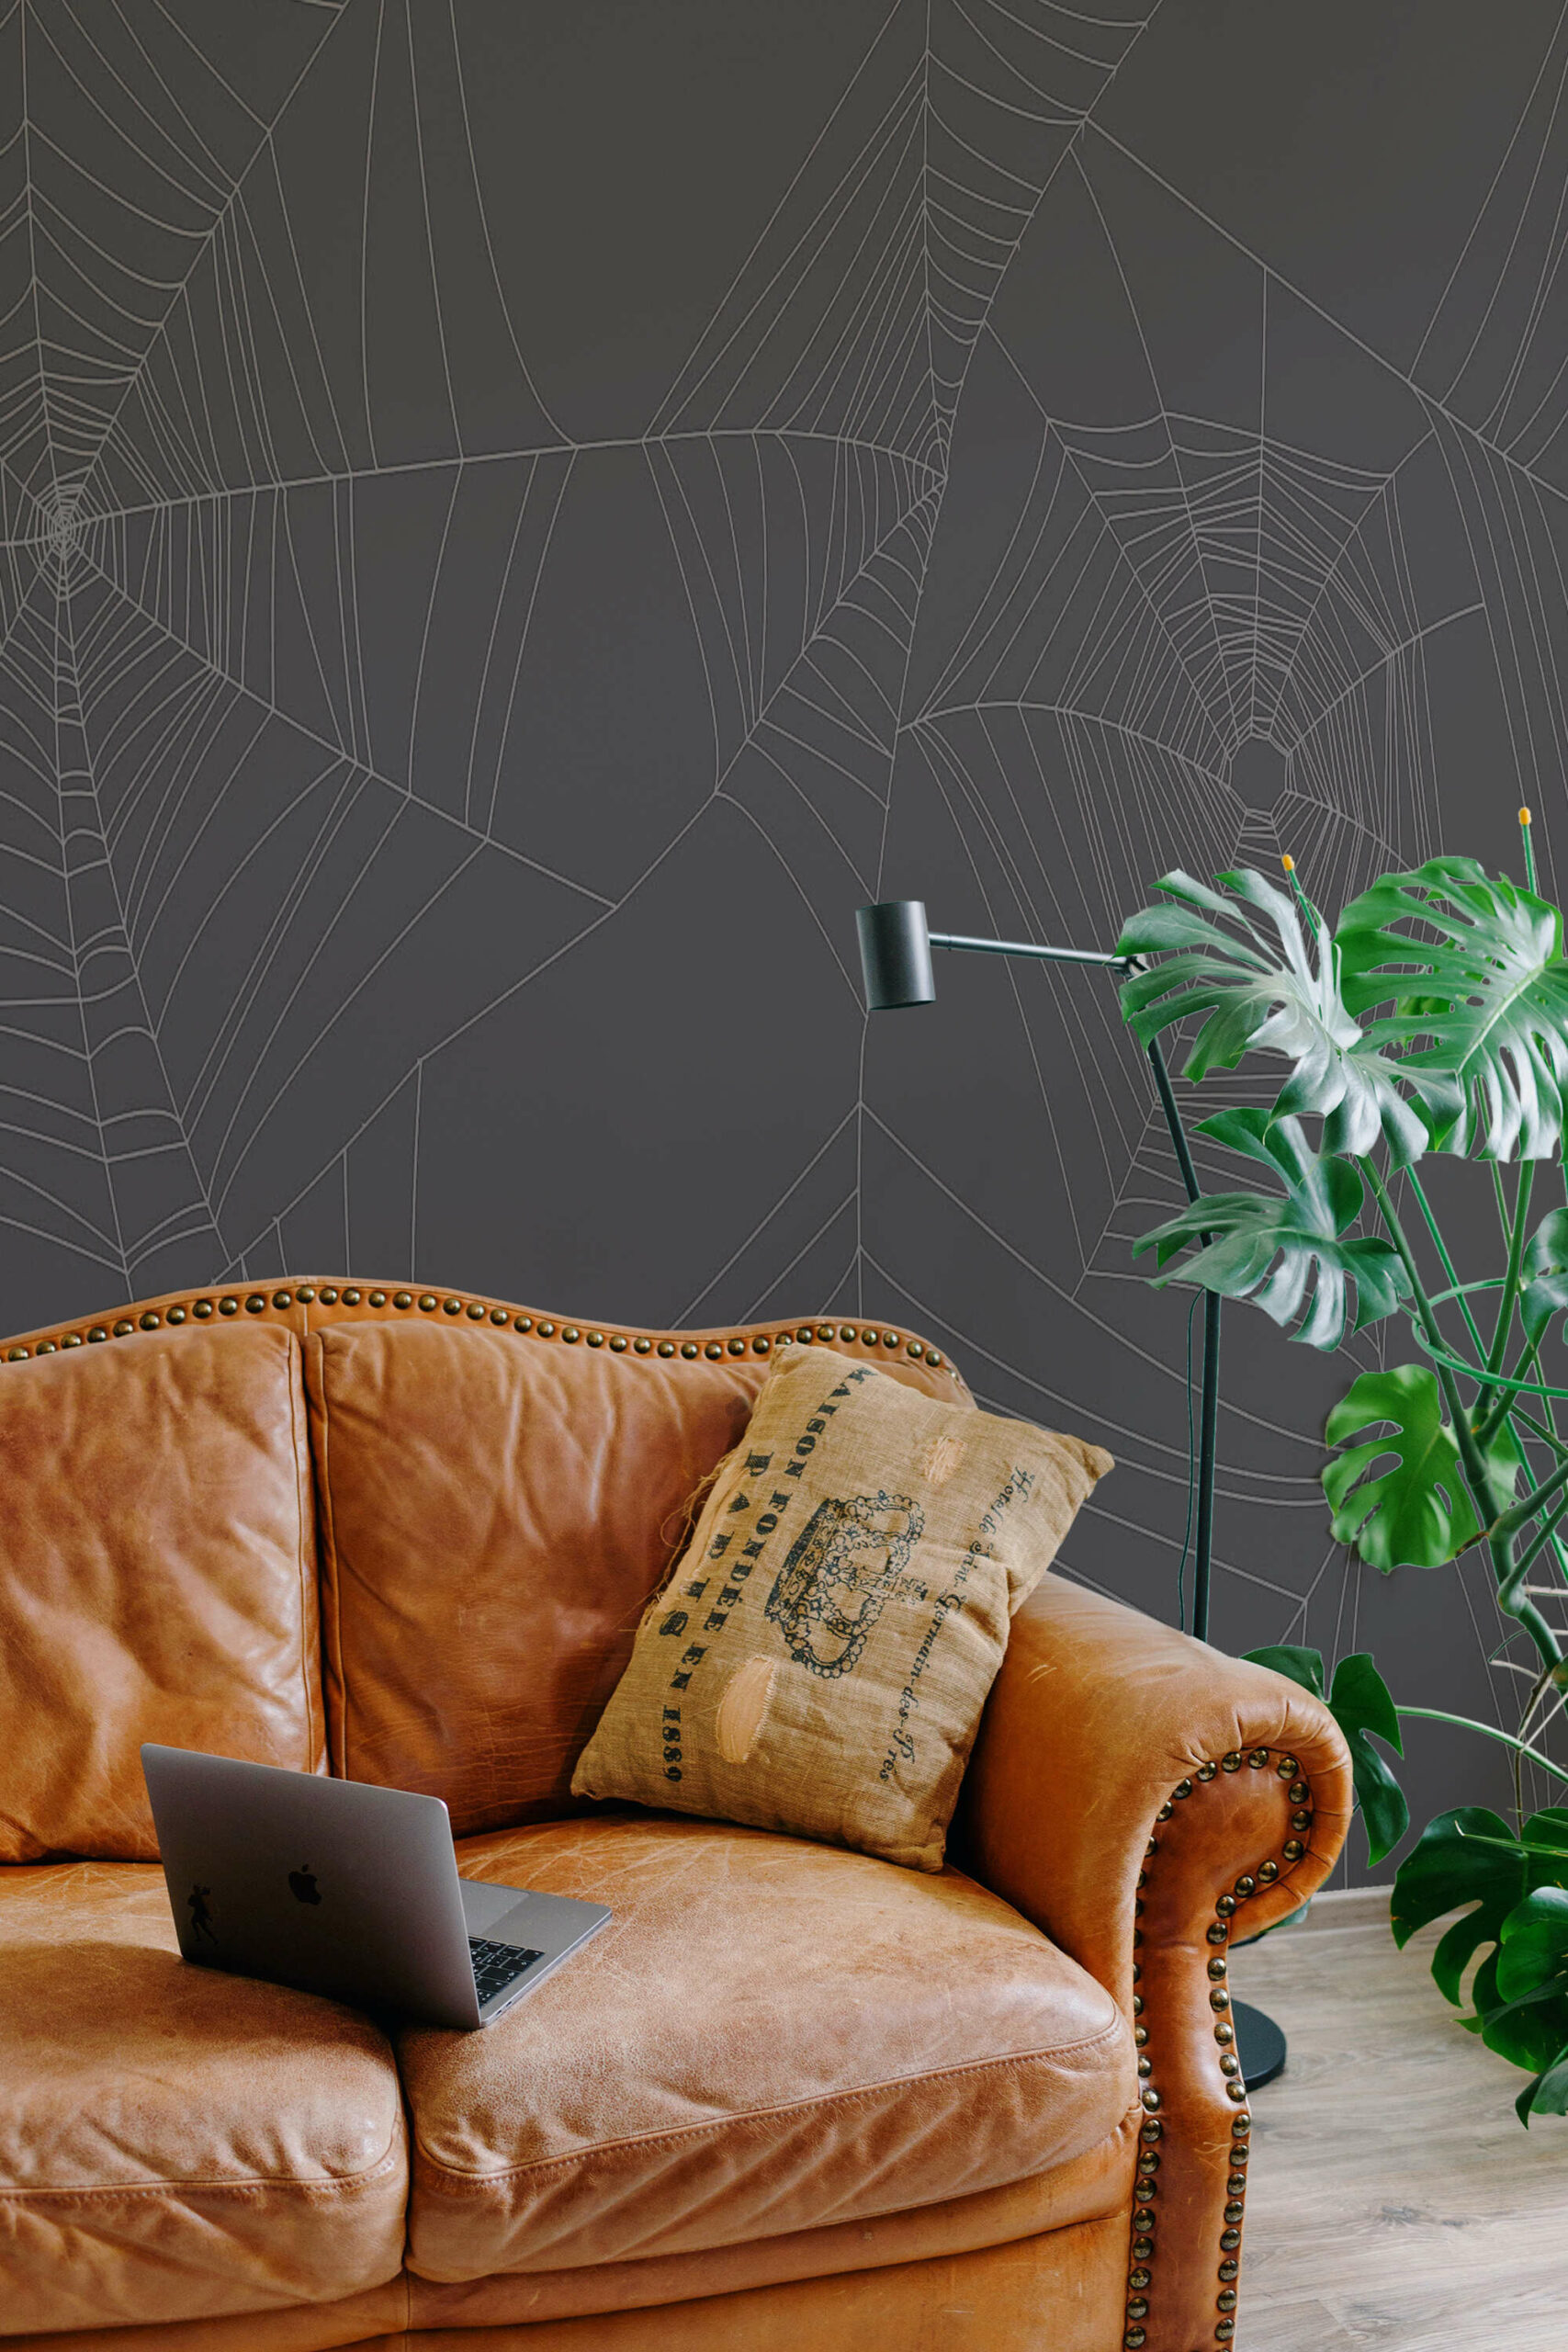 Mural for wall by Fancy Walls: Spiderweb in Dark Gray